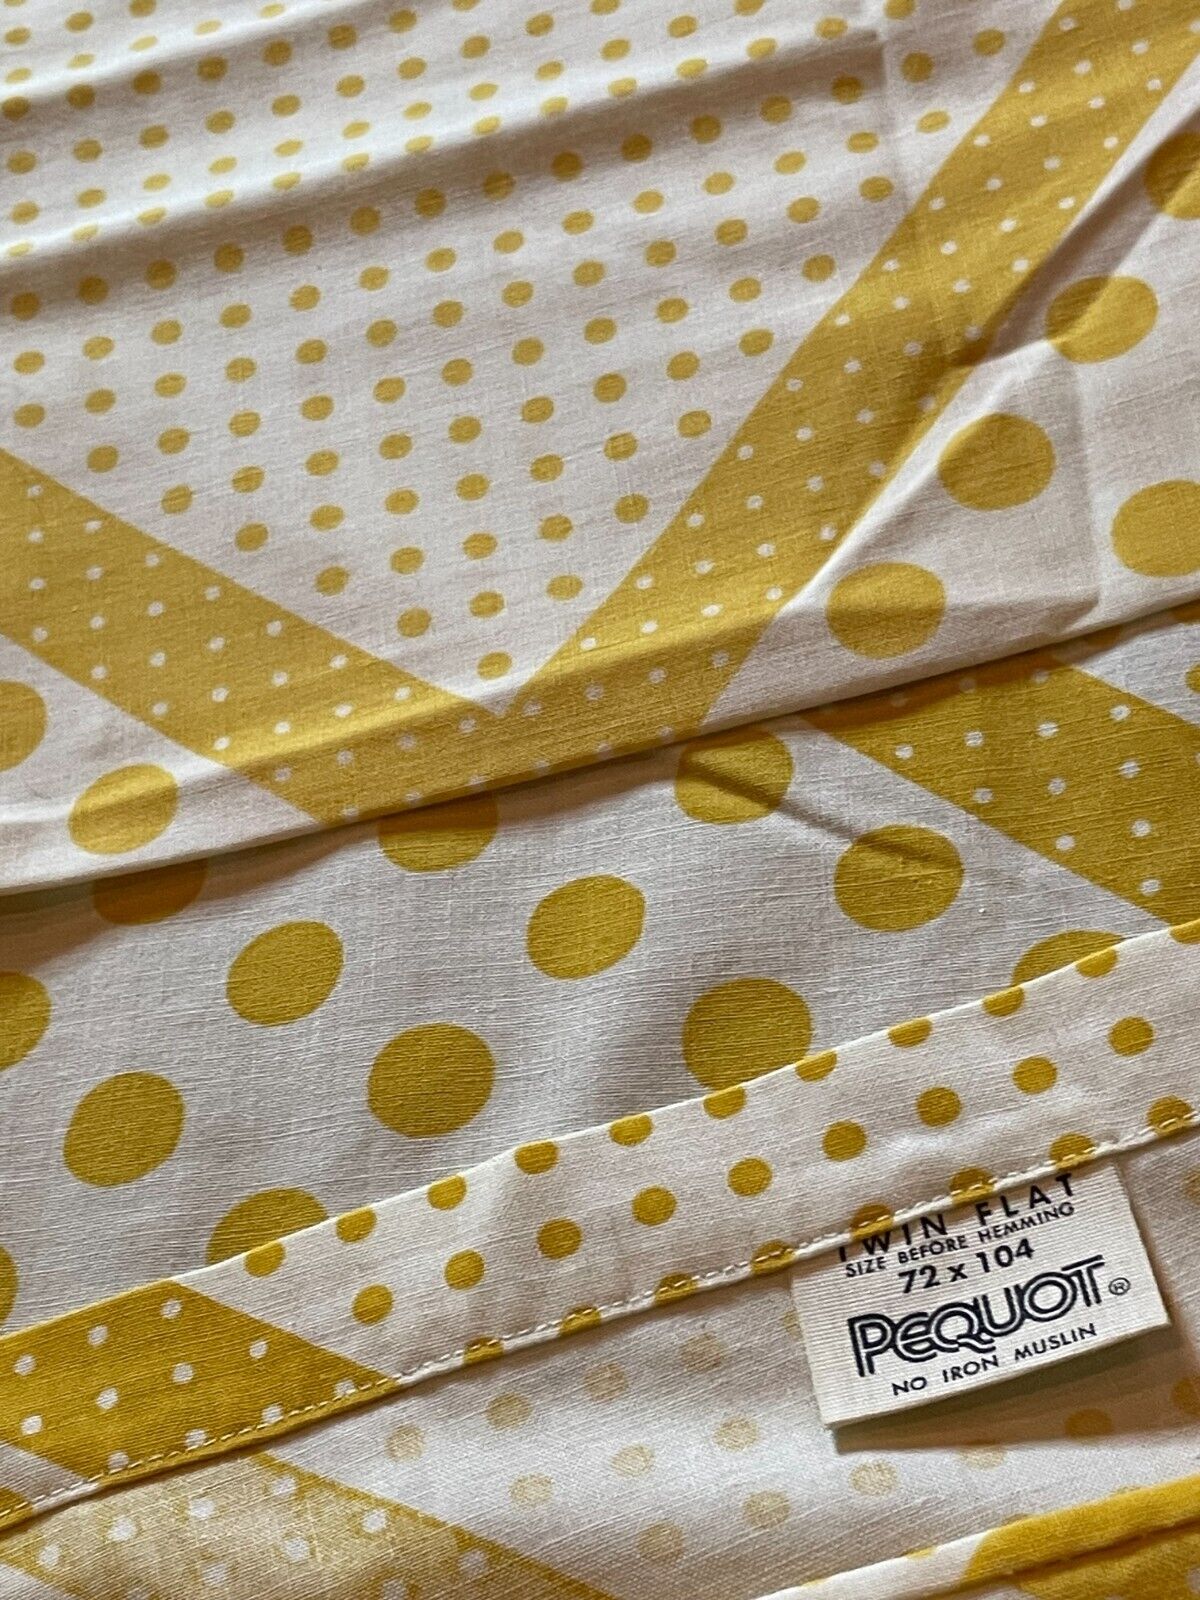 Vintage Pequot Mod 60s MCM Kitschy Yellow Polka Dot Twin Bed Sheet Set + Cases